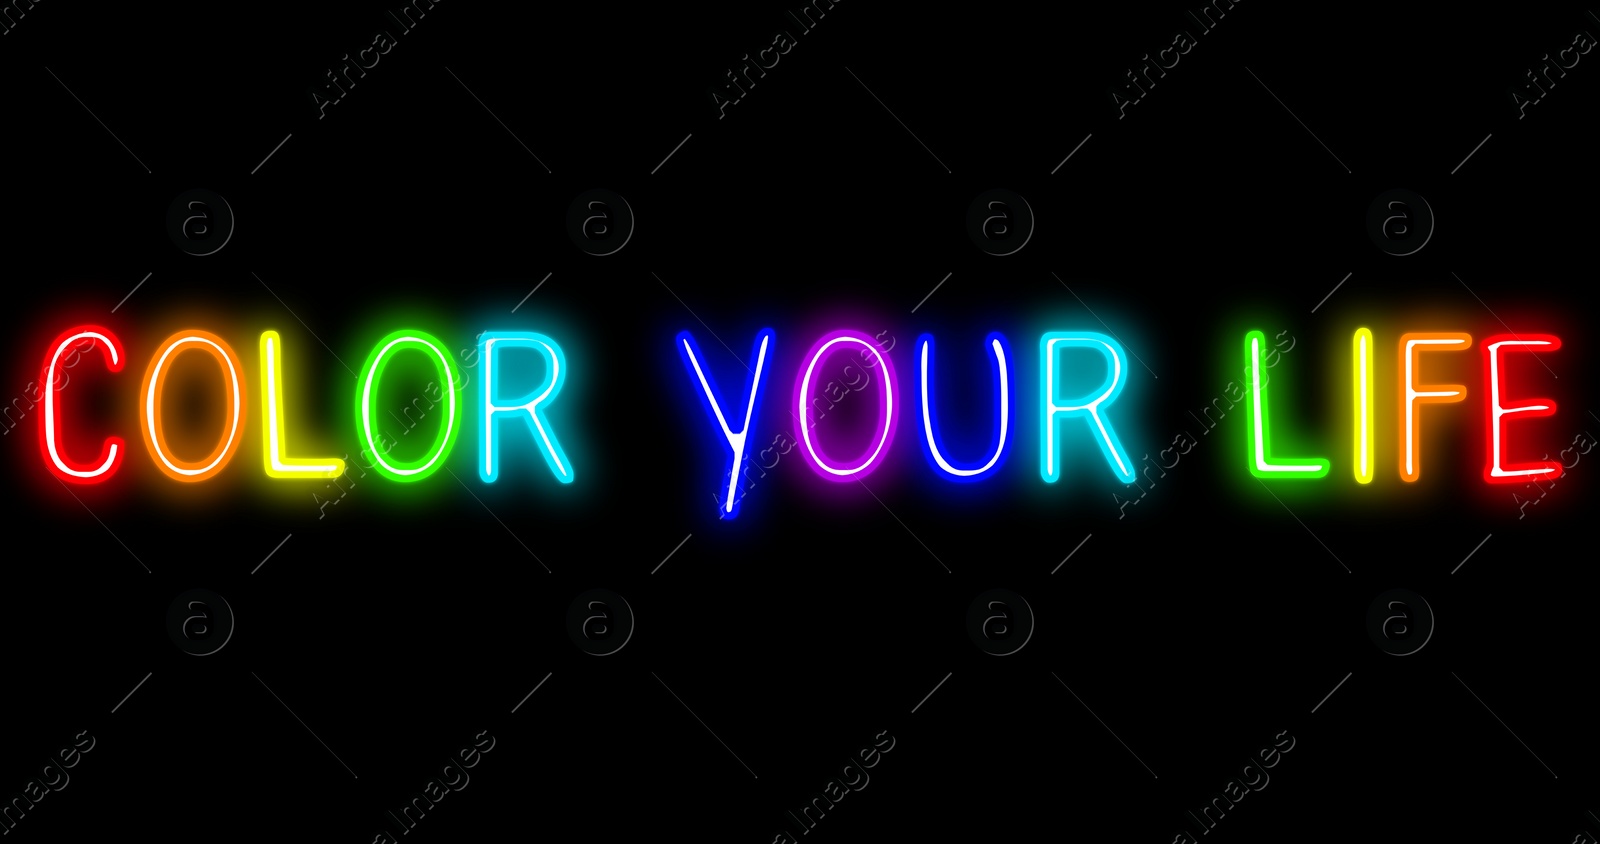 Illustration of Glowing neon sign with phrase Color Your Life on black background